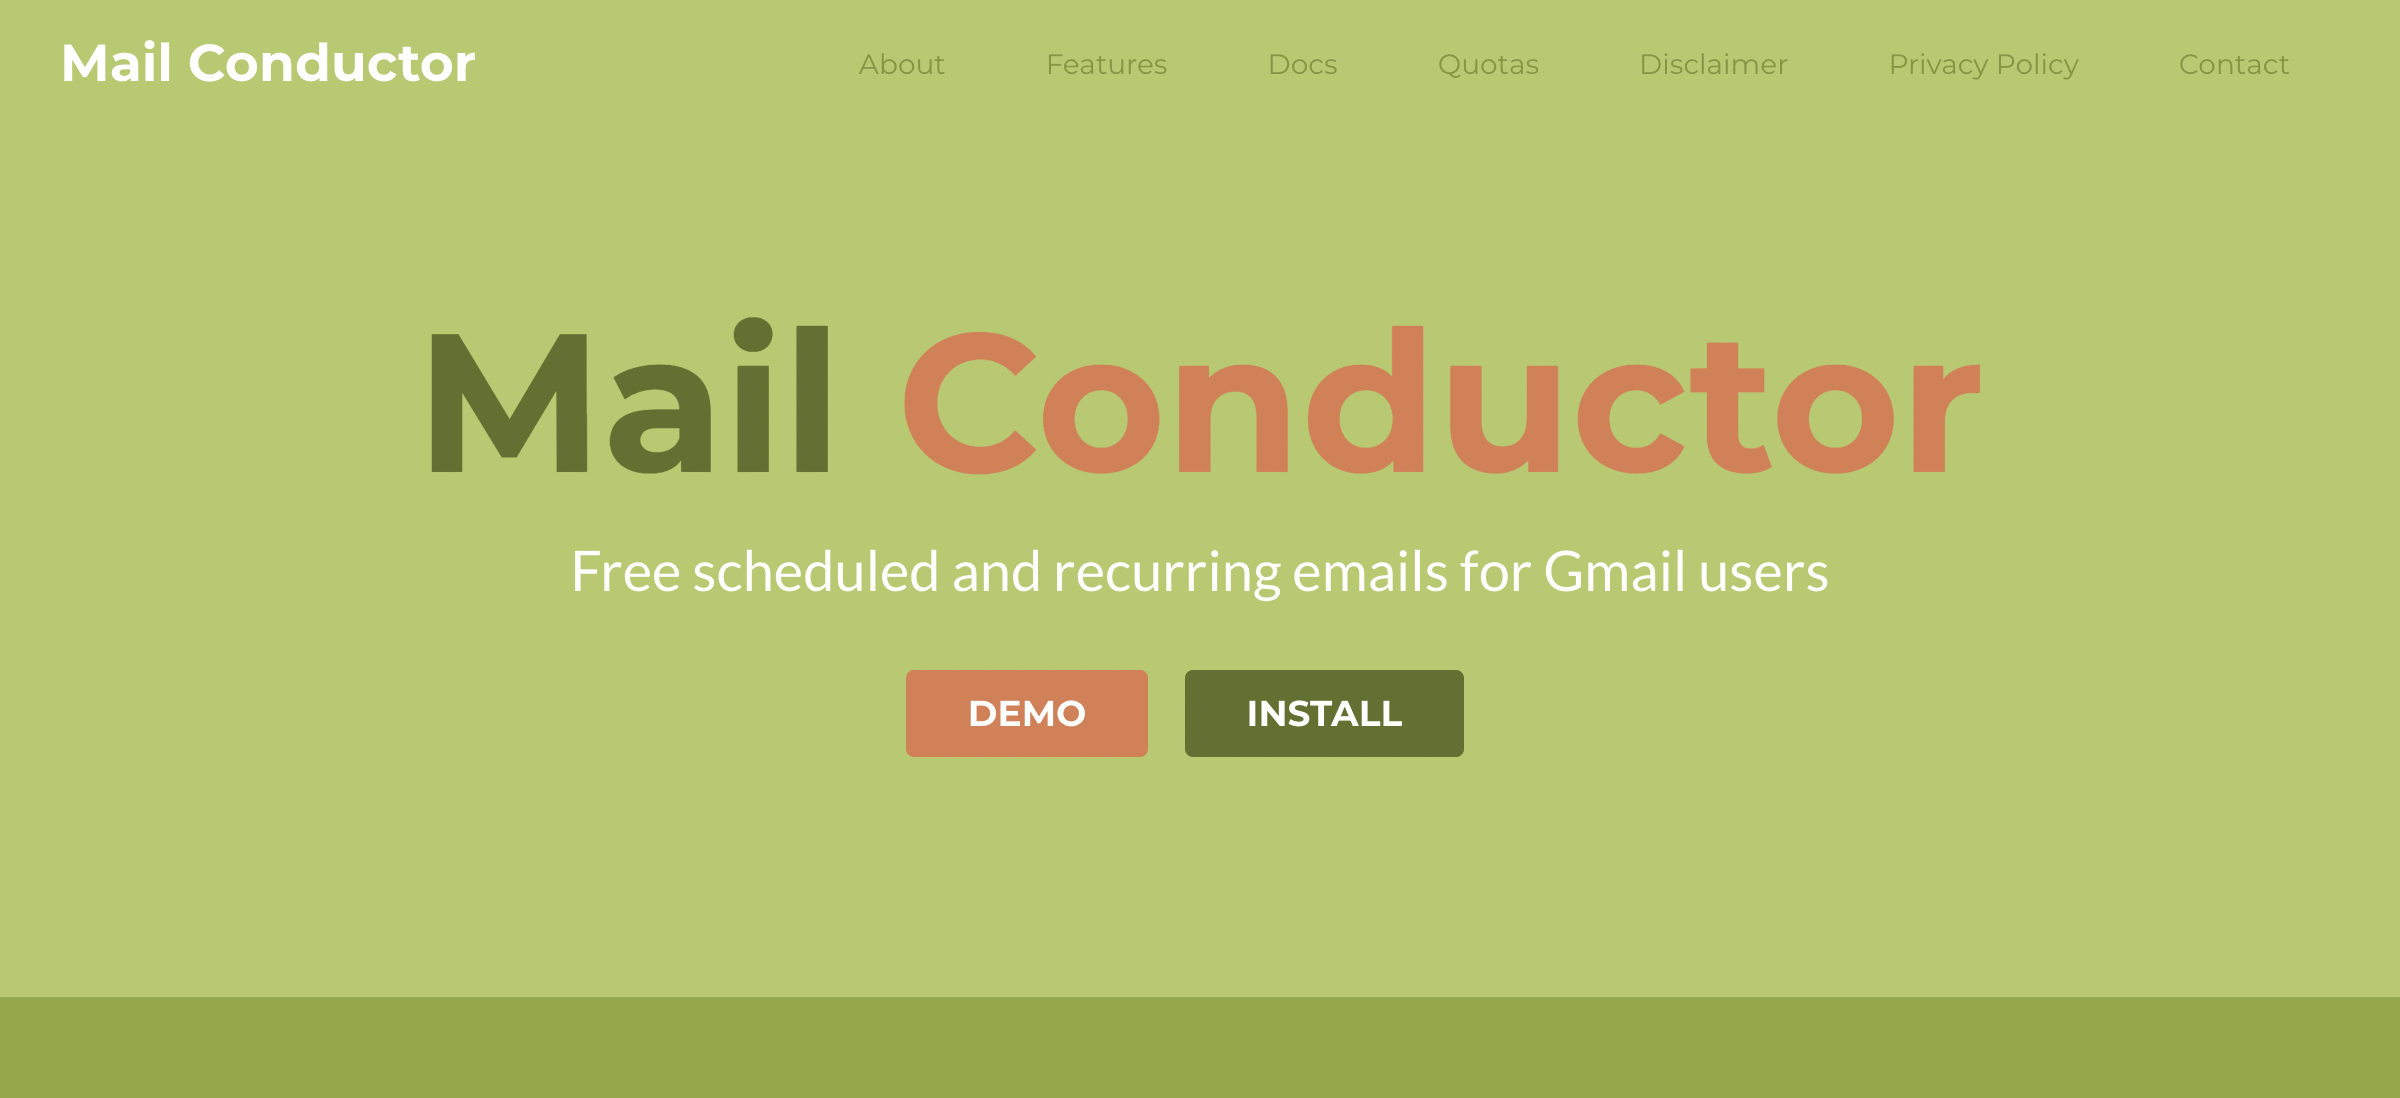 Mailconductor homepage